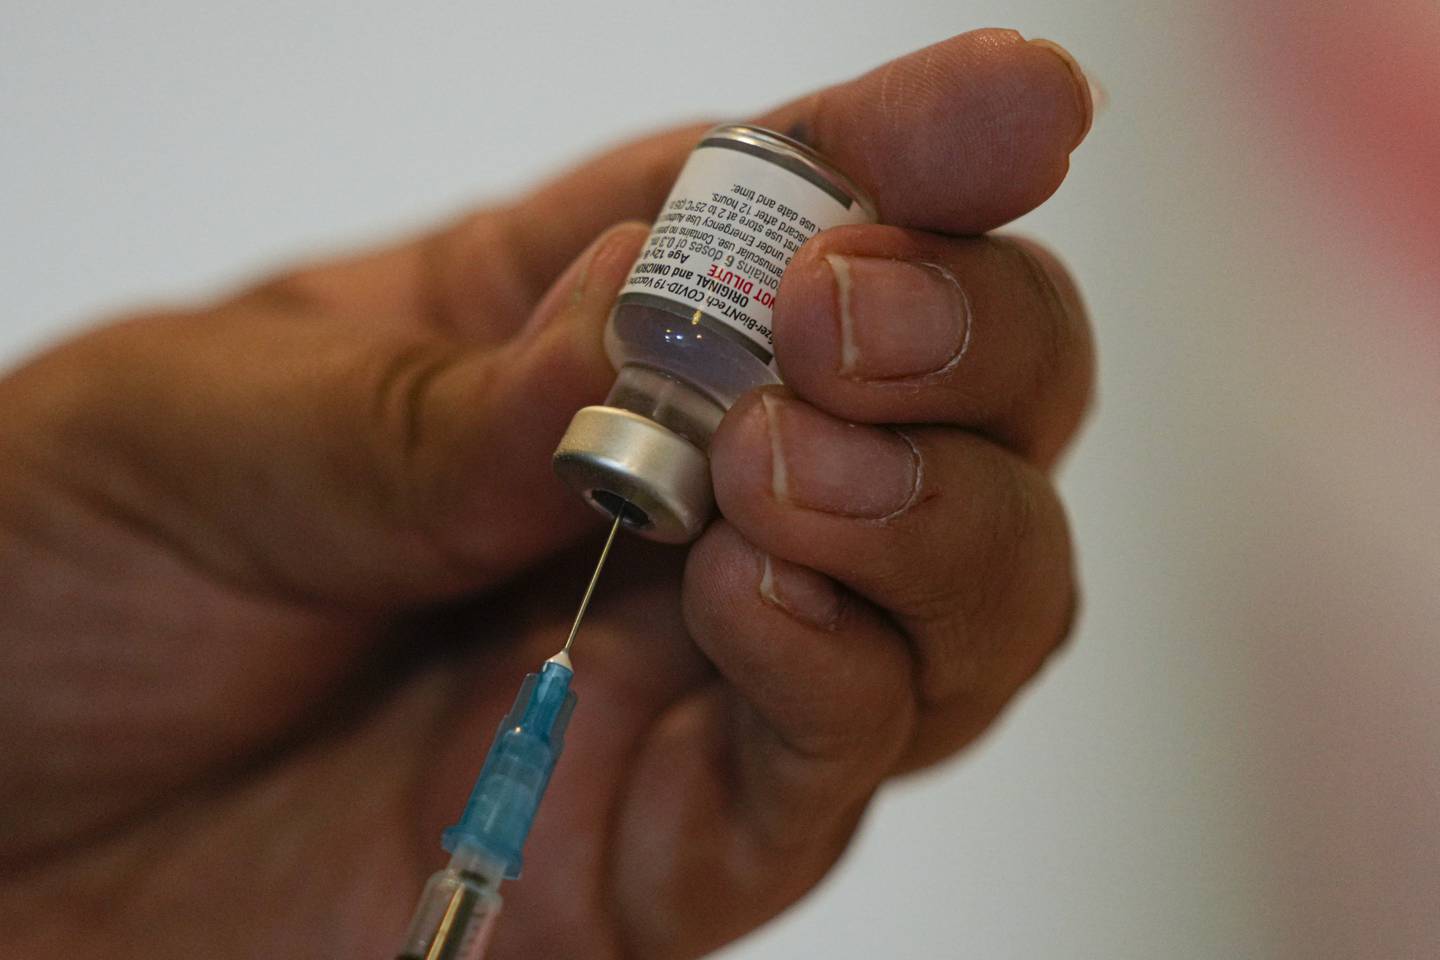 A healthcare worker prepares a dose of the COVID-19 bivalent booster at the start of a vaccination campaign for people 80 years and older, in Santiago, Chile, Wednesday, Oct. 26, 2022.